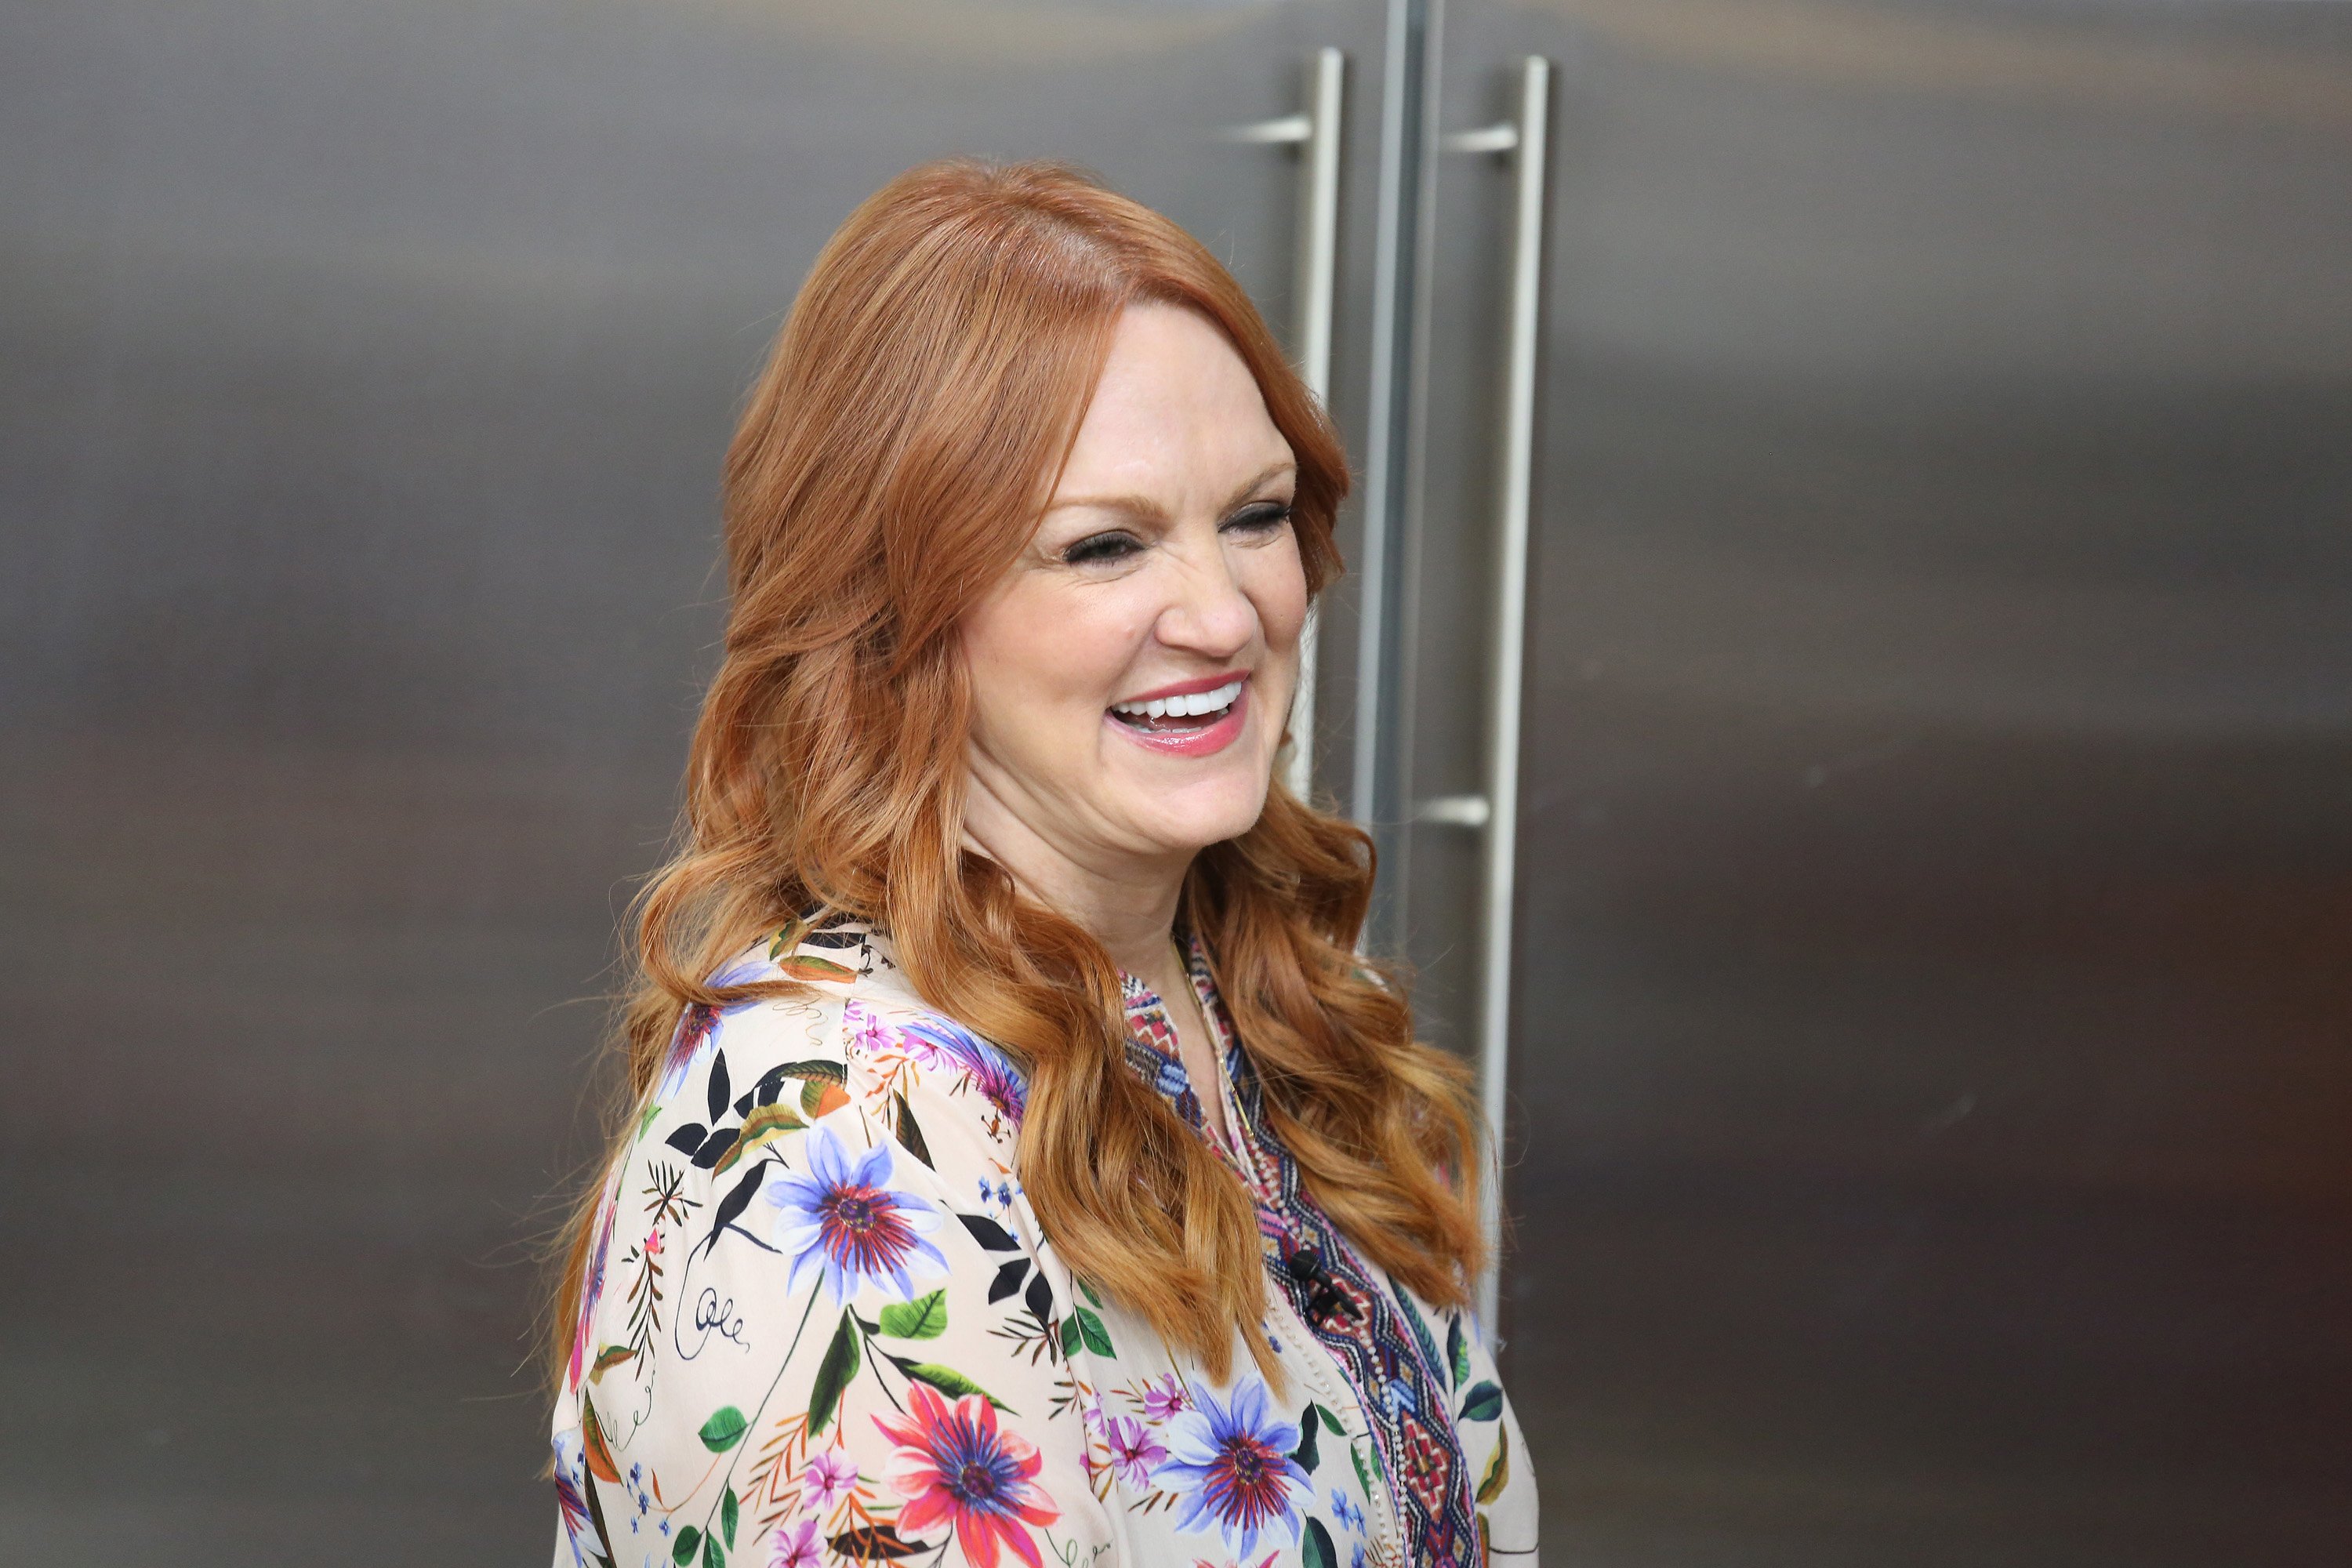 Ree Drummond The Pioneer Woman |  Tyler Essary/NBC/NBCU Photo Bank via Getty Images